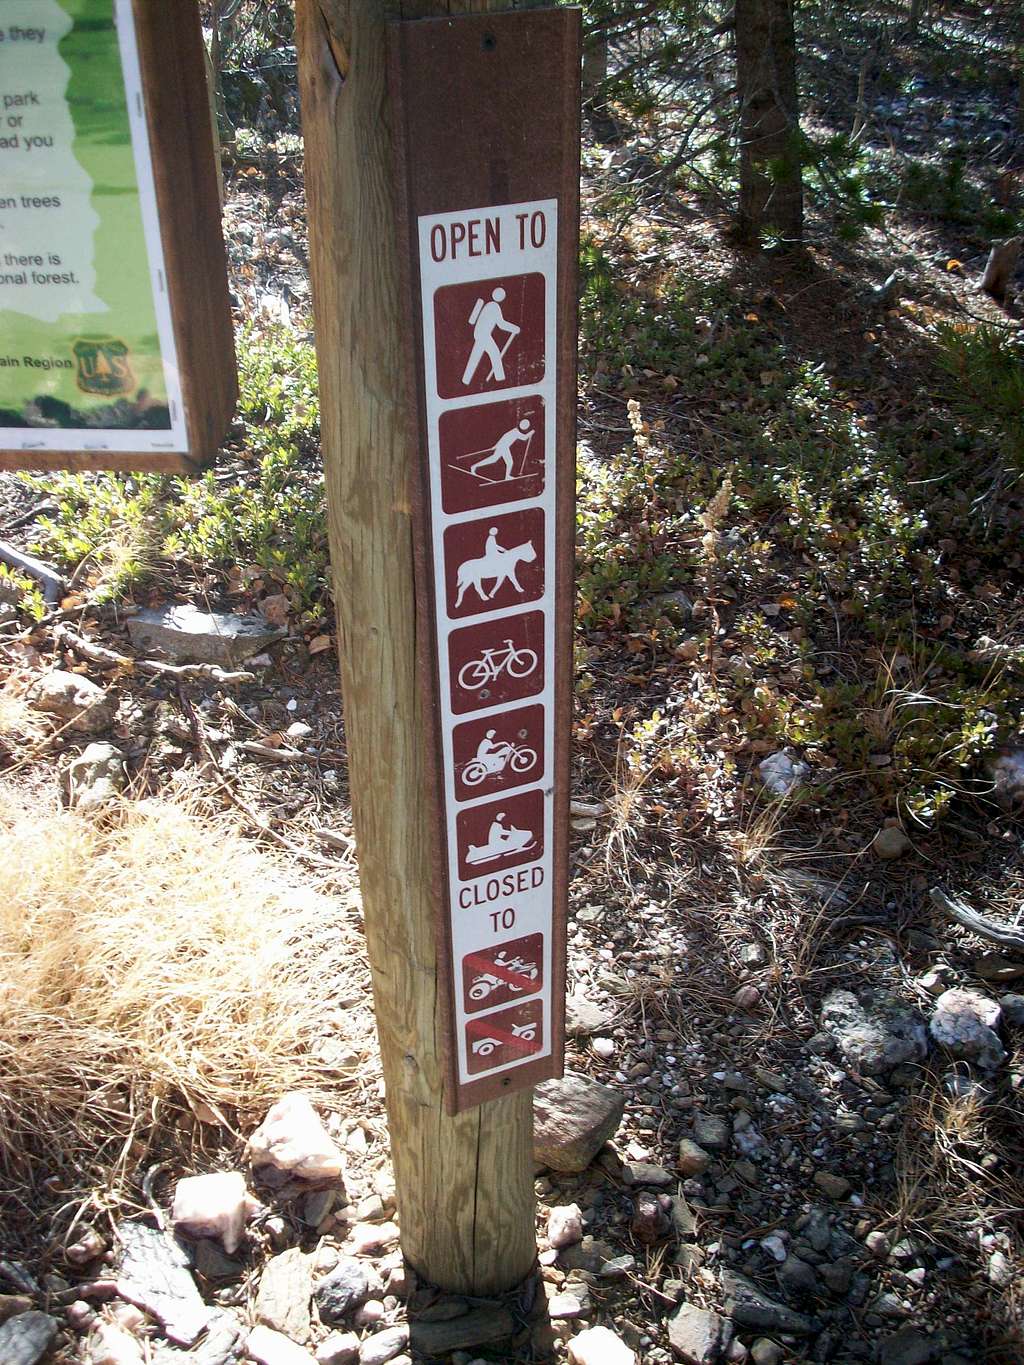 For Donner Hill Trail